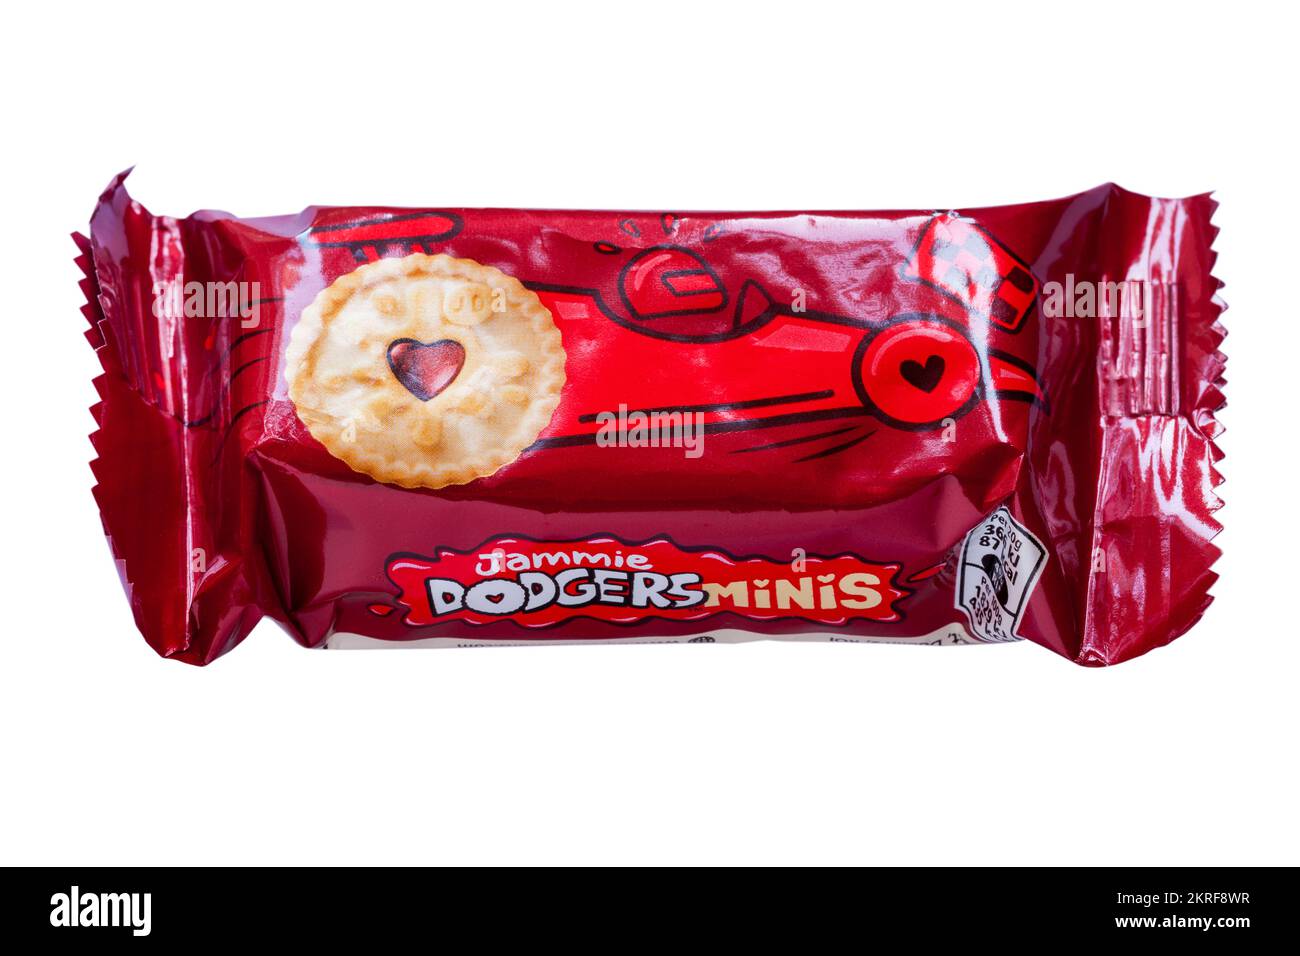 Jammie Dodgers Minis raspberry flavour snack pack isolated on white background Stock Photo